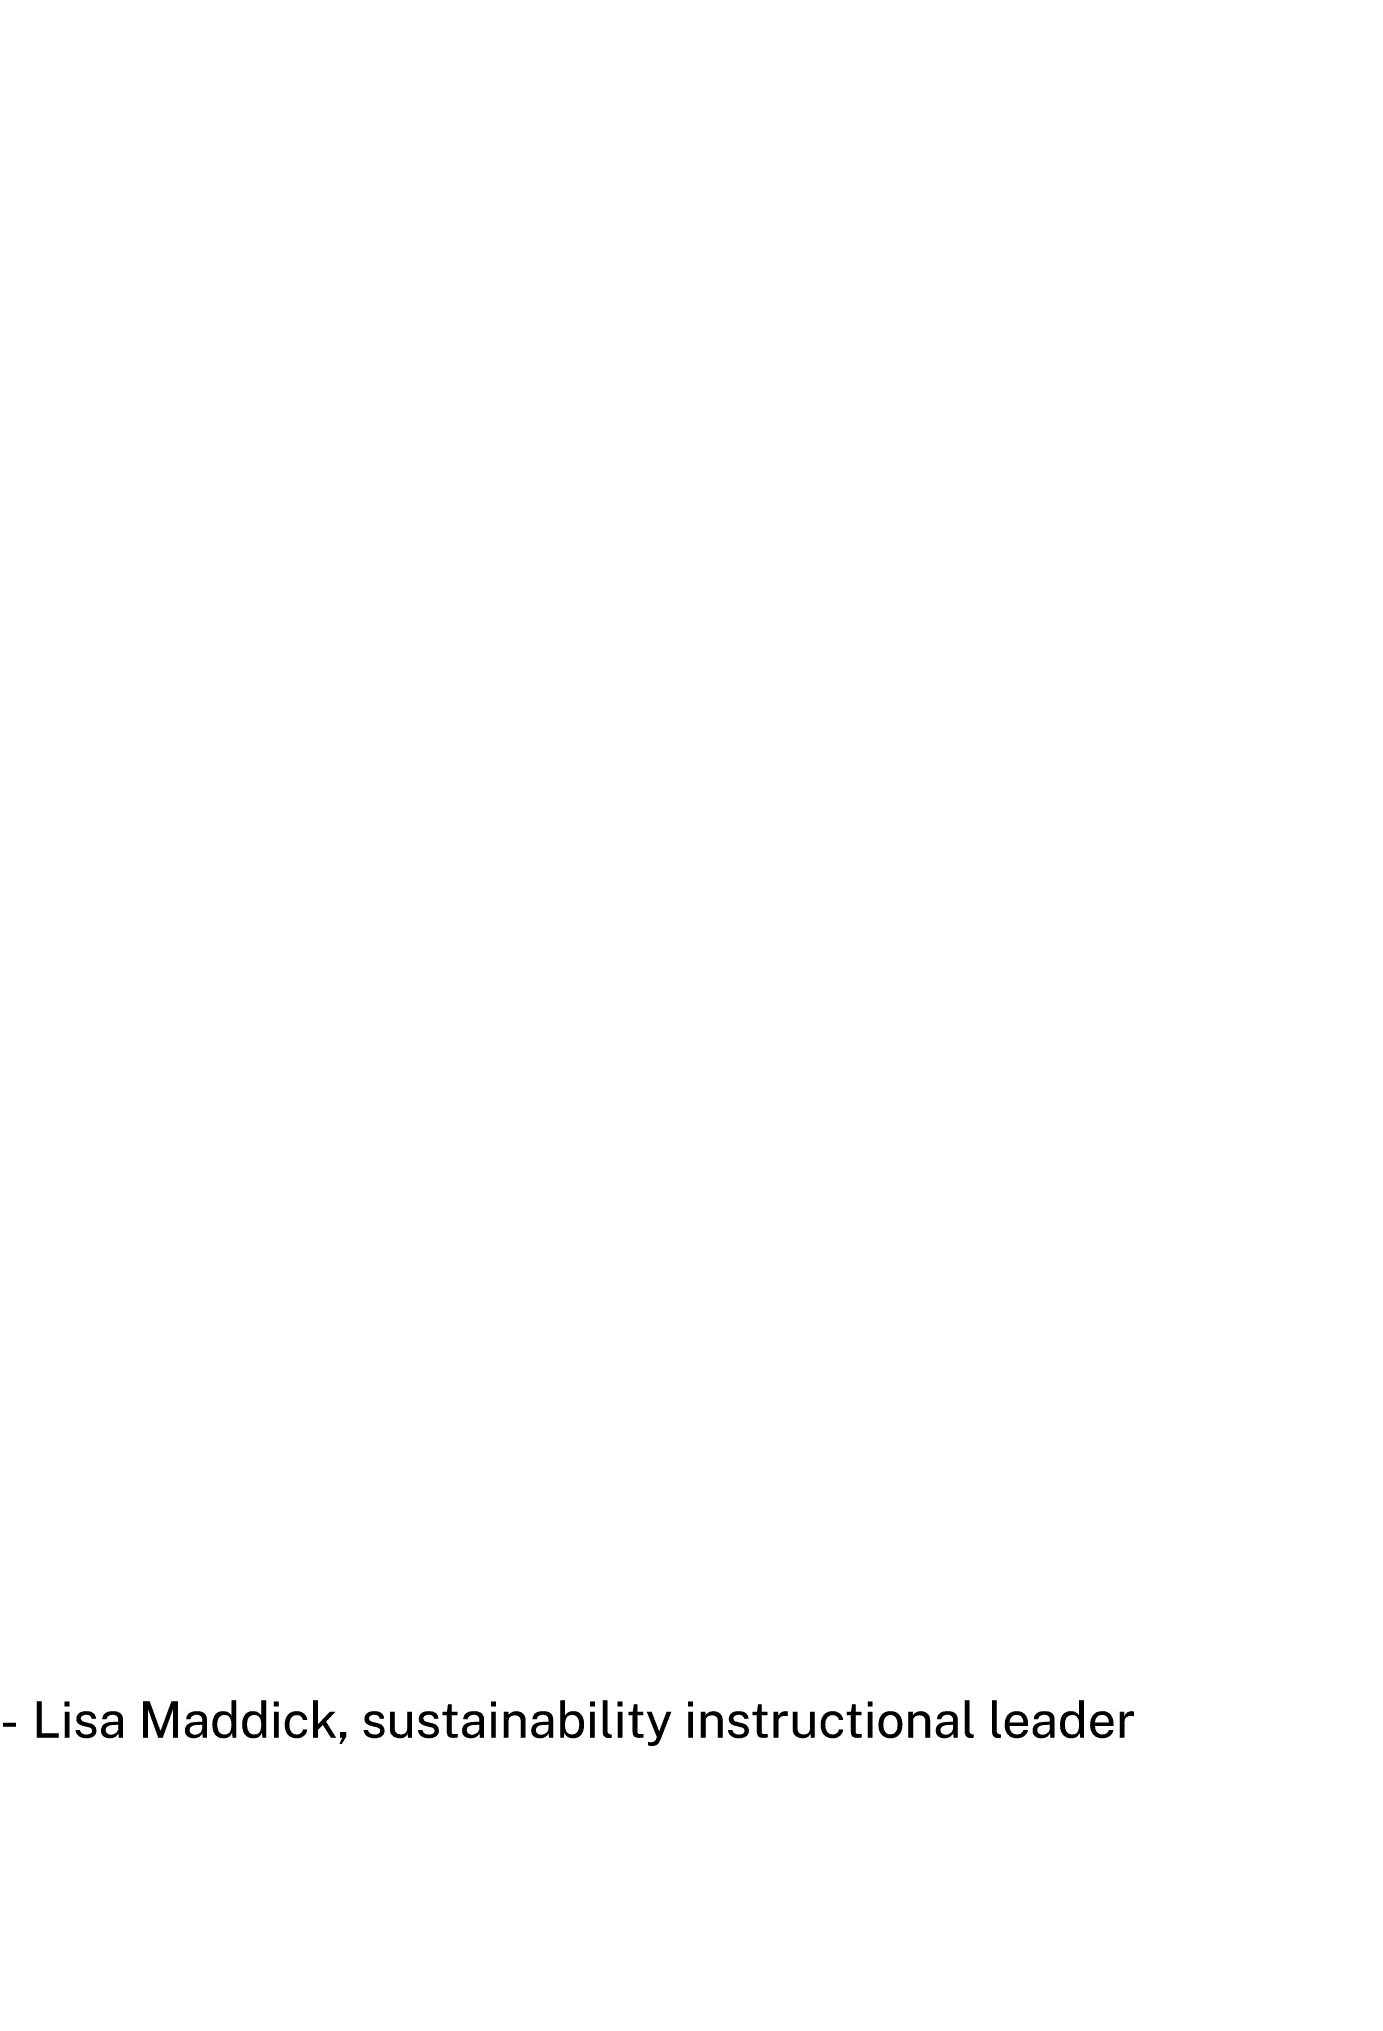 “We are always looking for fun and interesting ways to show children the benefits of growing our own food. The microp...